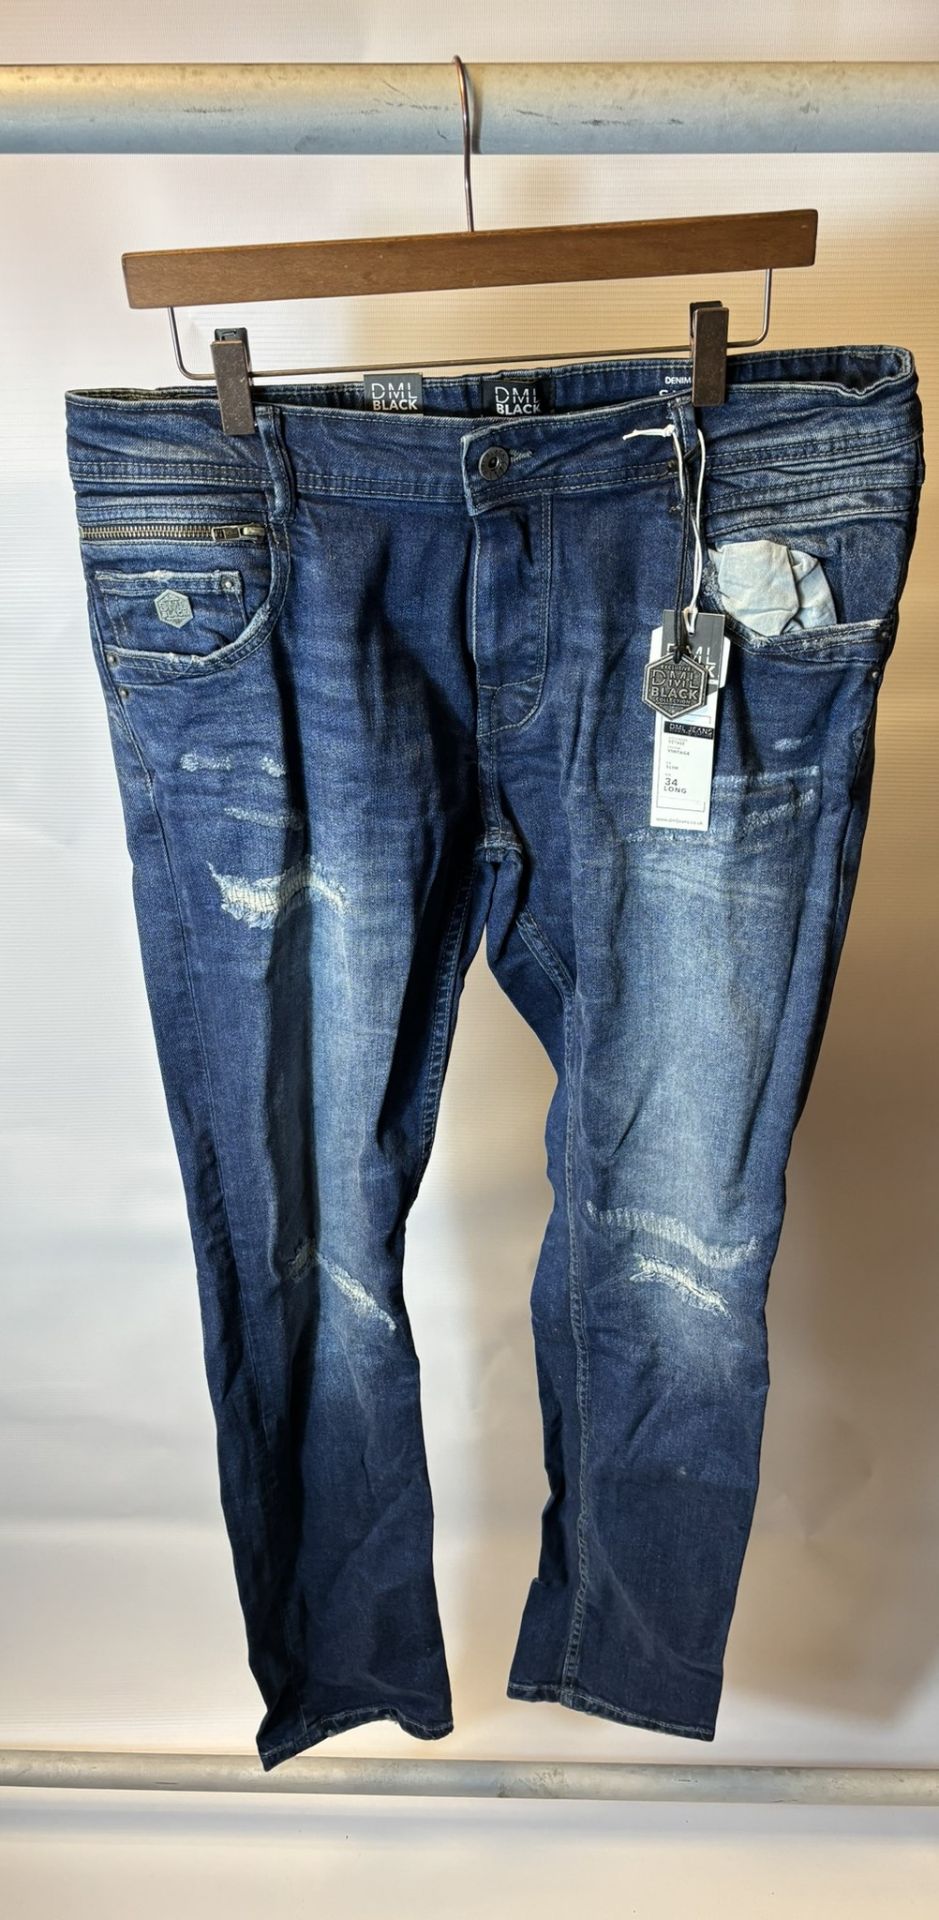 13 x Pairs Of various Sized DML Jeans Prophecy & Voyage Blue Jeans - Image 19 of 39